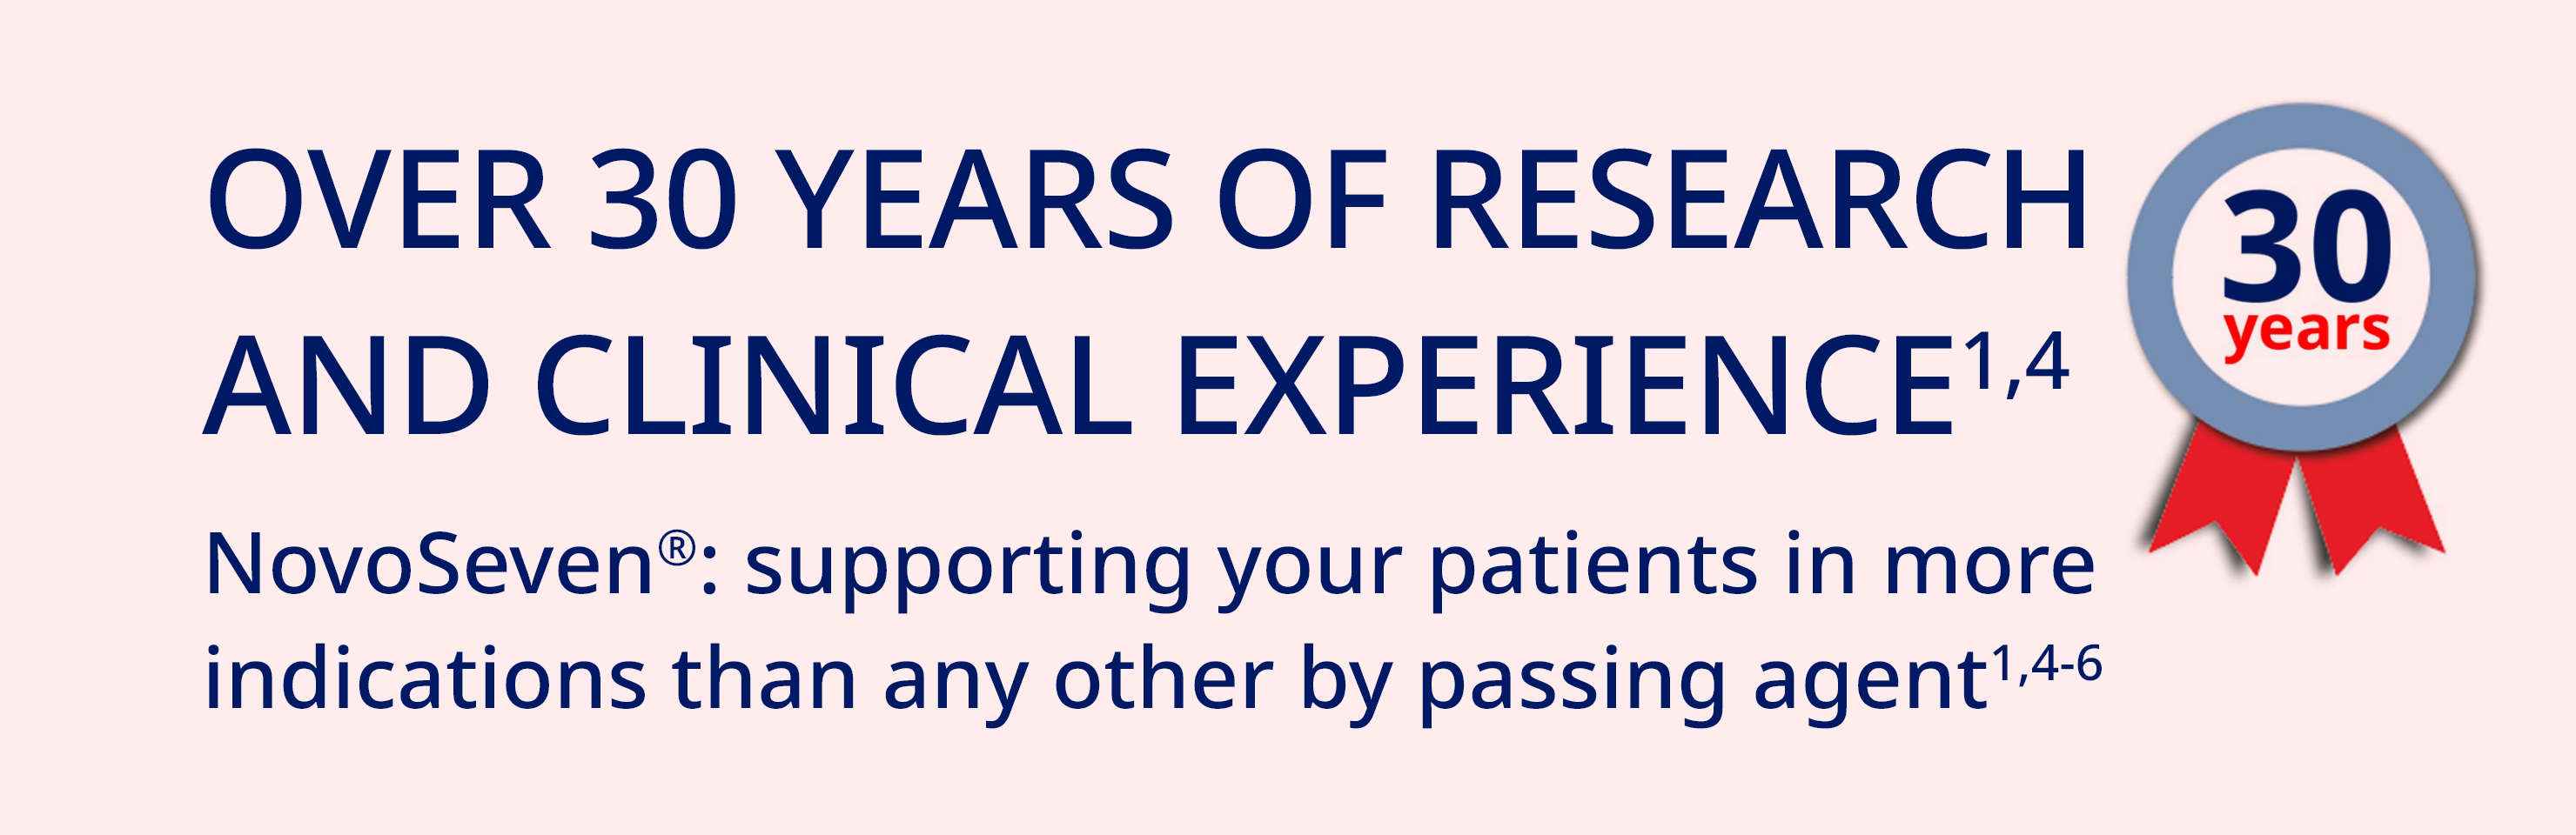 Research and clinical experience